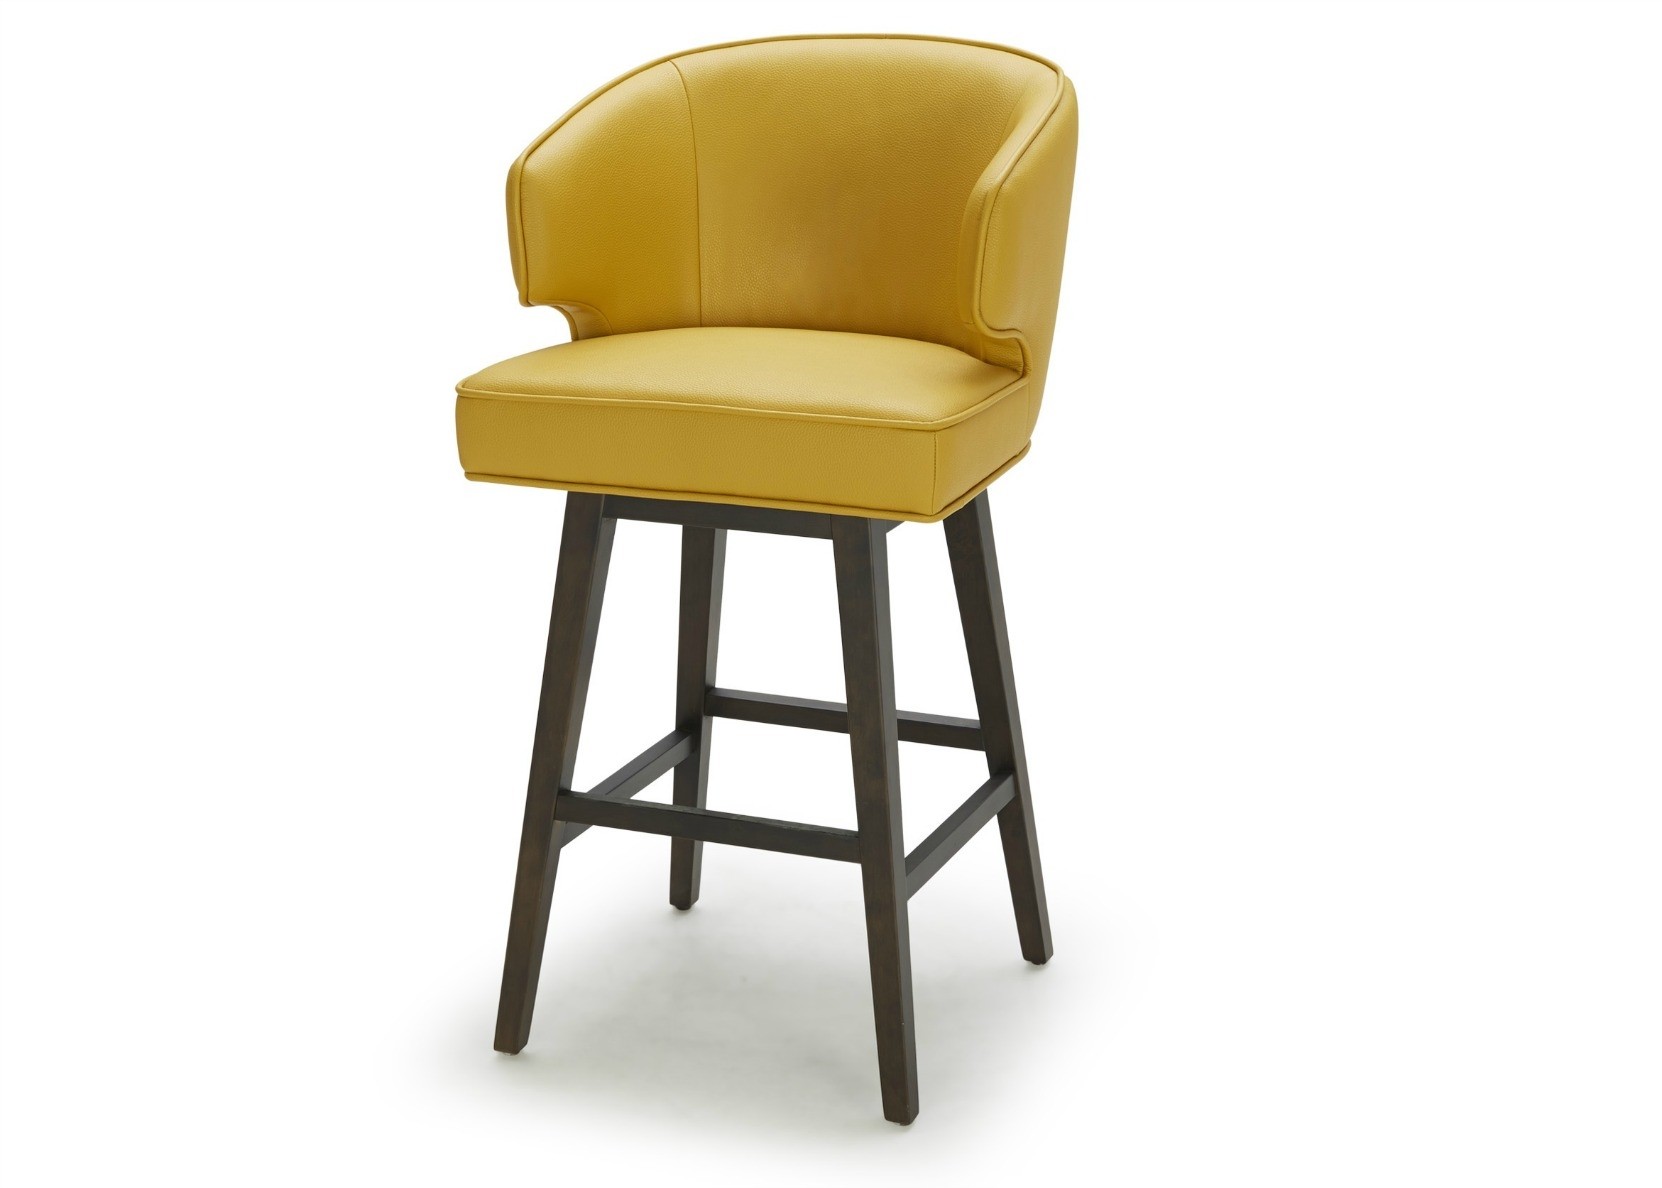 Daisy bar stool in bright yellow leather not just brown